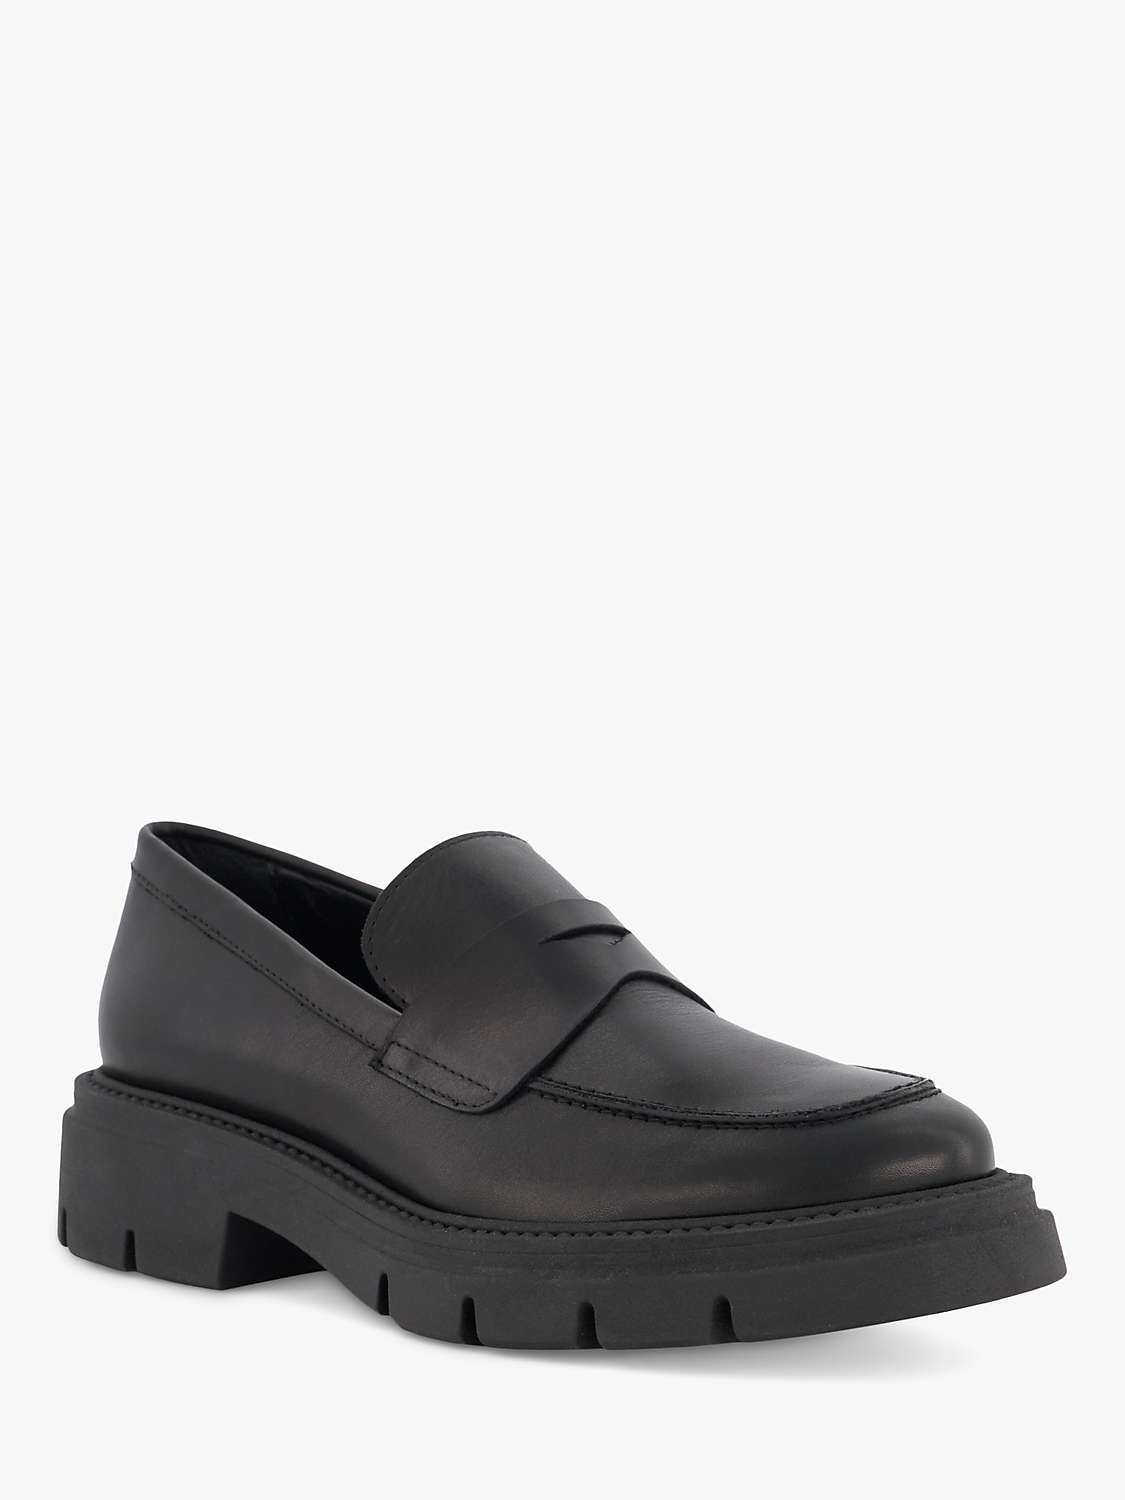 Buy Dune Gracelyne Leather Penny Trim Chunky Loafers Online at johnlewis.com